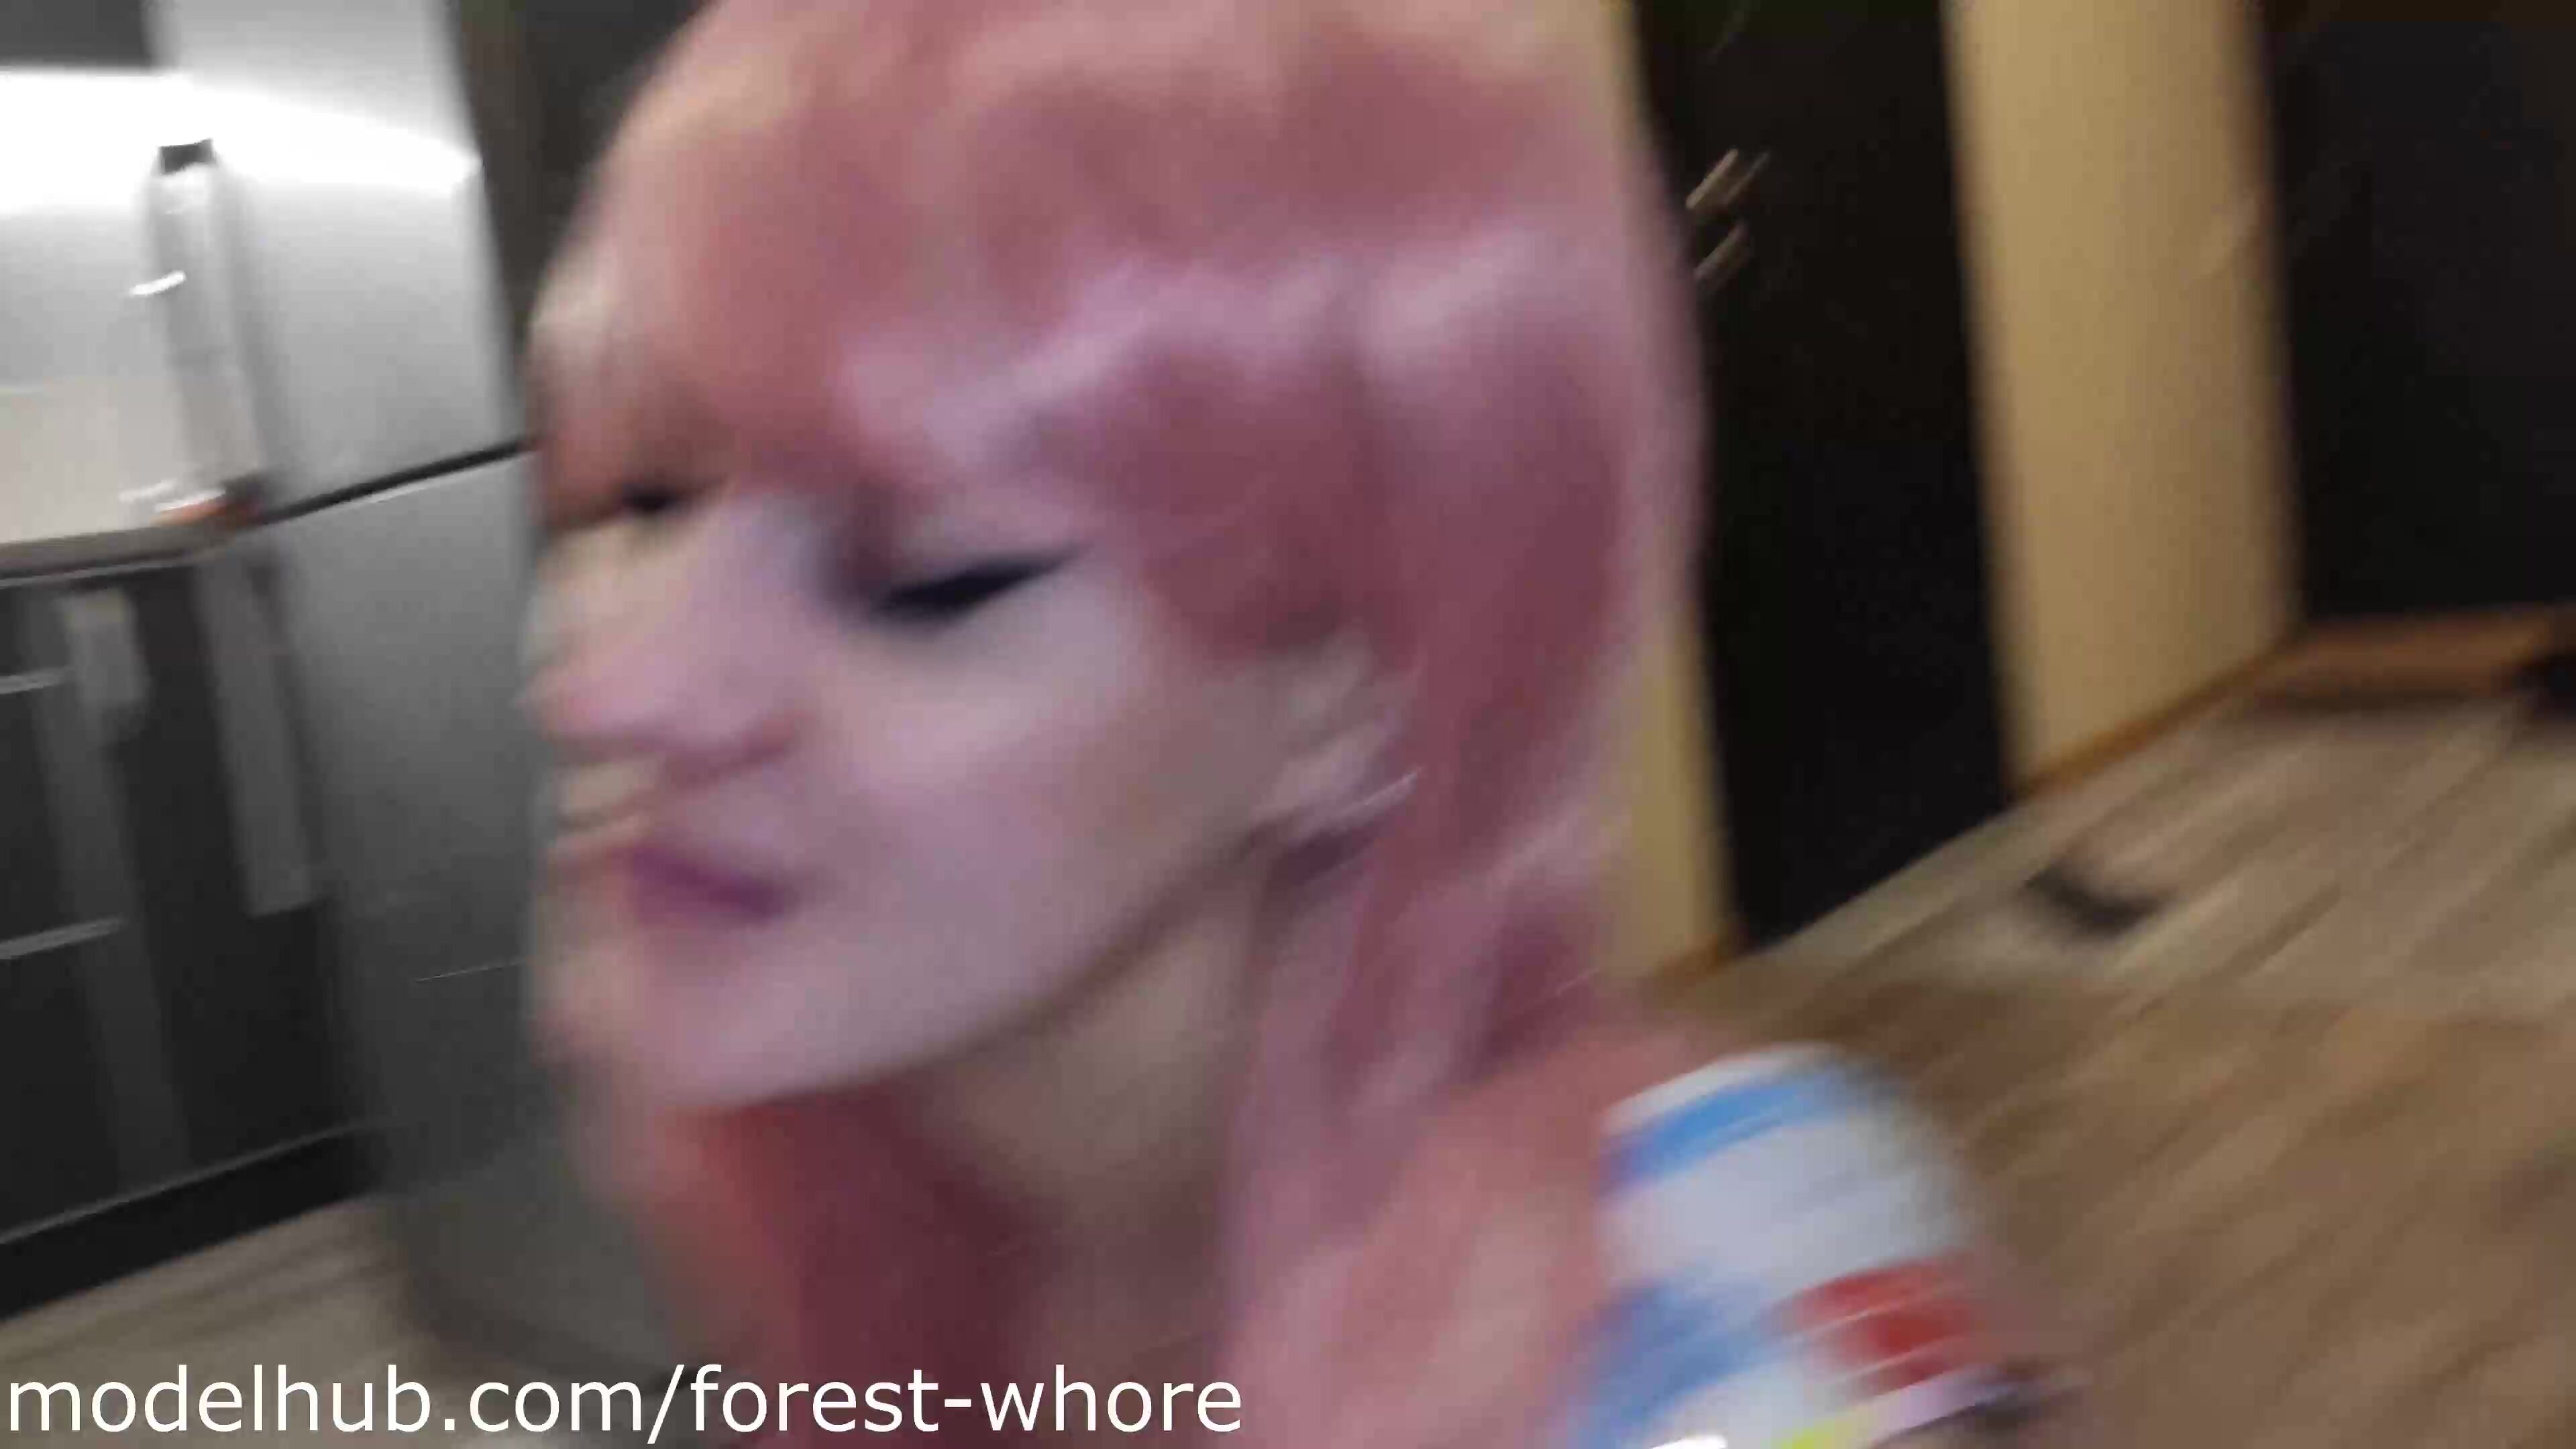 Forest Whore - Licking Feet, Anal and Use Like Human As